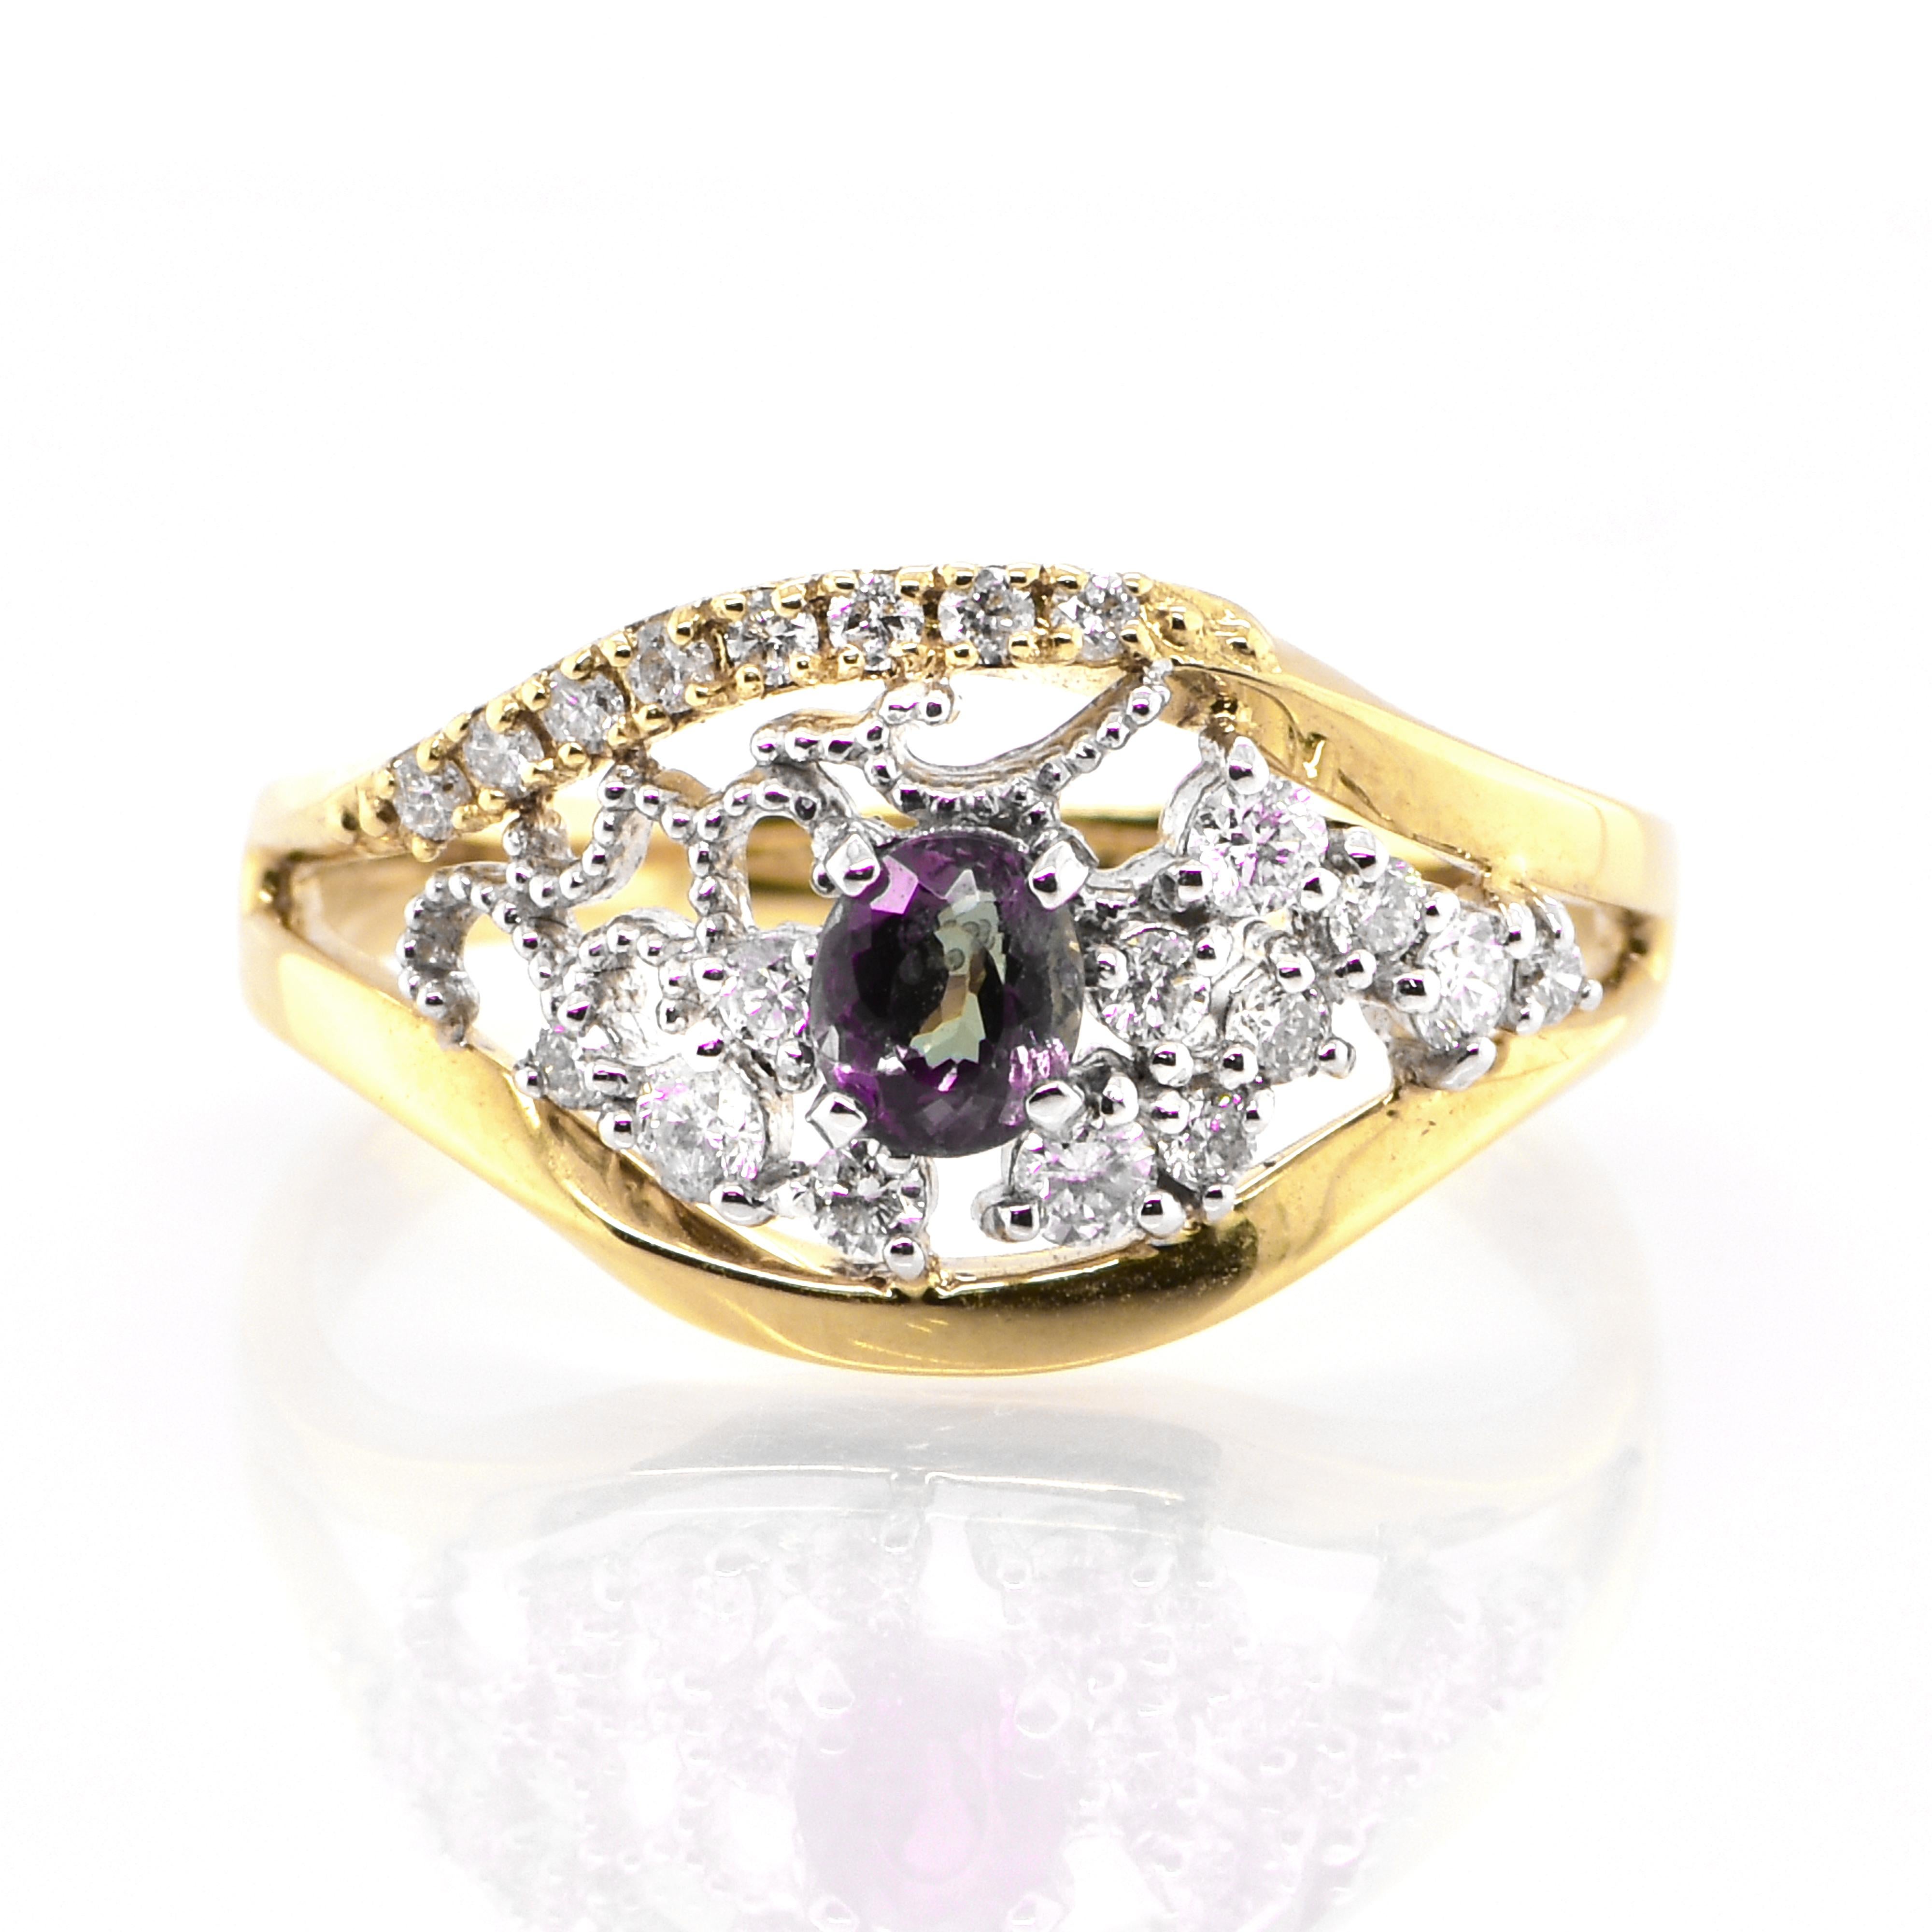 A gorgeous ring featuring 0.33 Carat, Natural Alexandrite and 0.27 Carats of Diamond Accents set in 18 Karat Yellow Gold and Platinum Alexandrites produce a natural color-change phenomenon as they exhibit a Bluish Green Color under Fluorescent Light